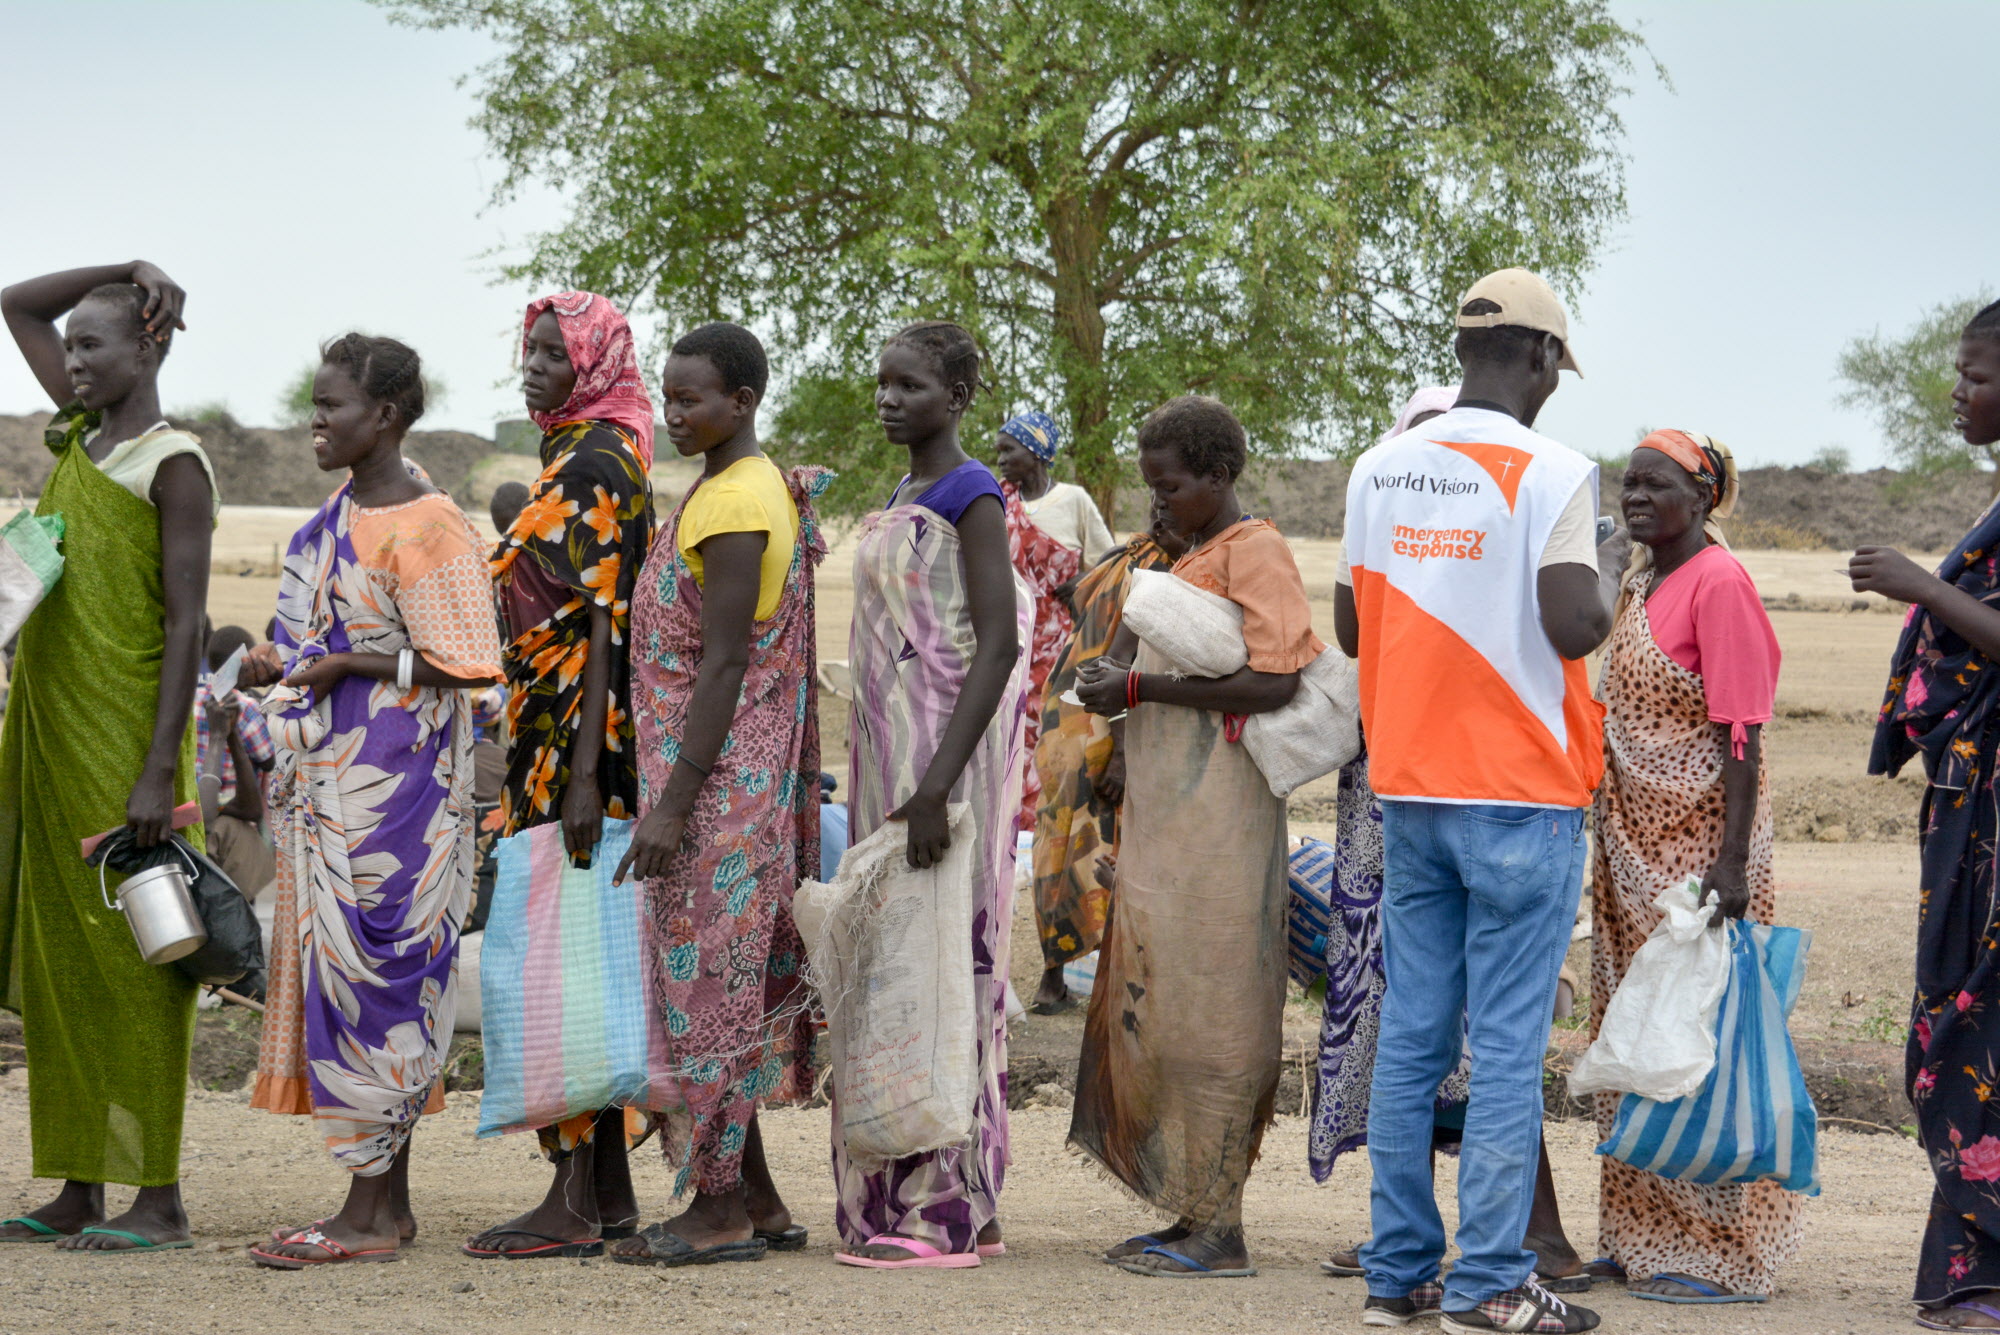 In a recent opinion piece in Christianity Today, World Vision U.S. President Richard Stearns shares his thoughts about fighting extreme poverty.